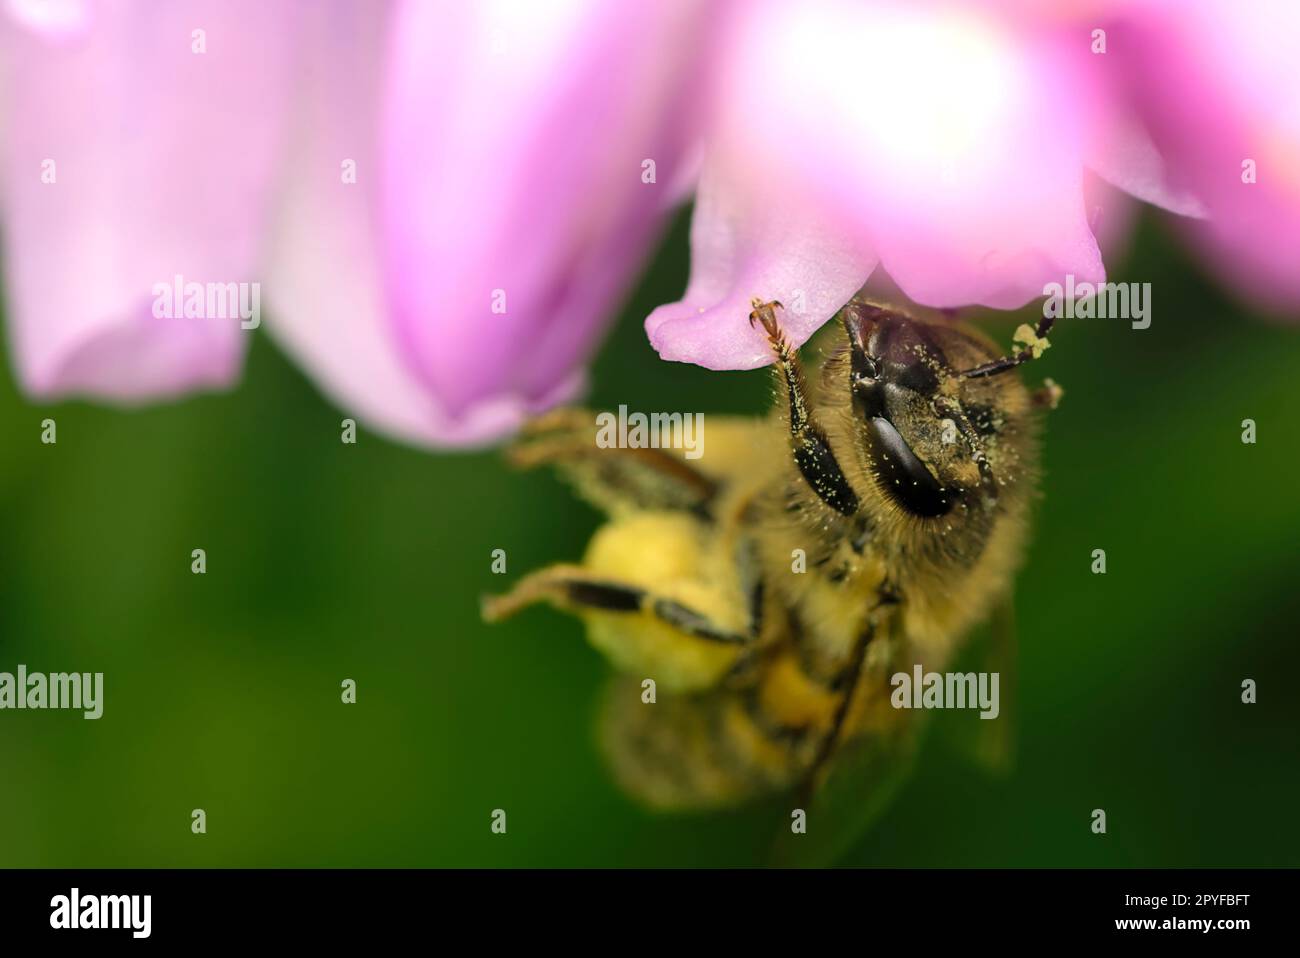 Single honeybee (apis mellifera) collecting pollen from a pink flower, macro photography, insects, biodiversity, pollination, nature Stock Photo